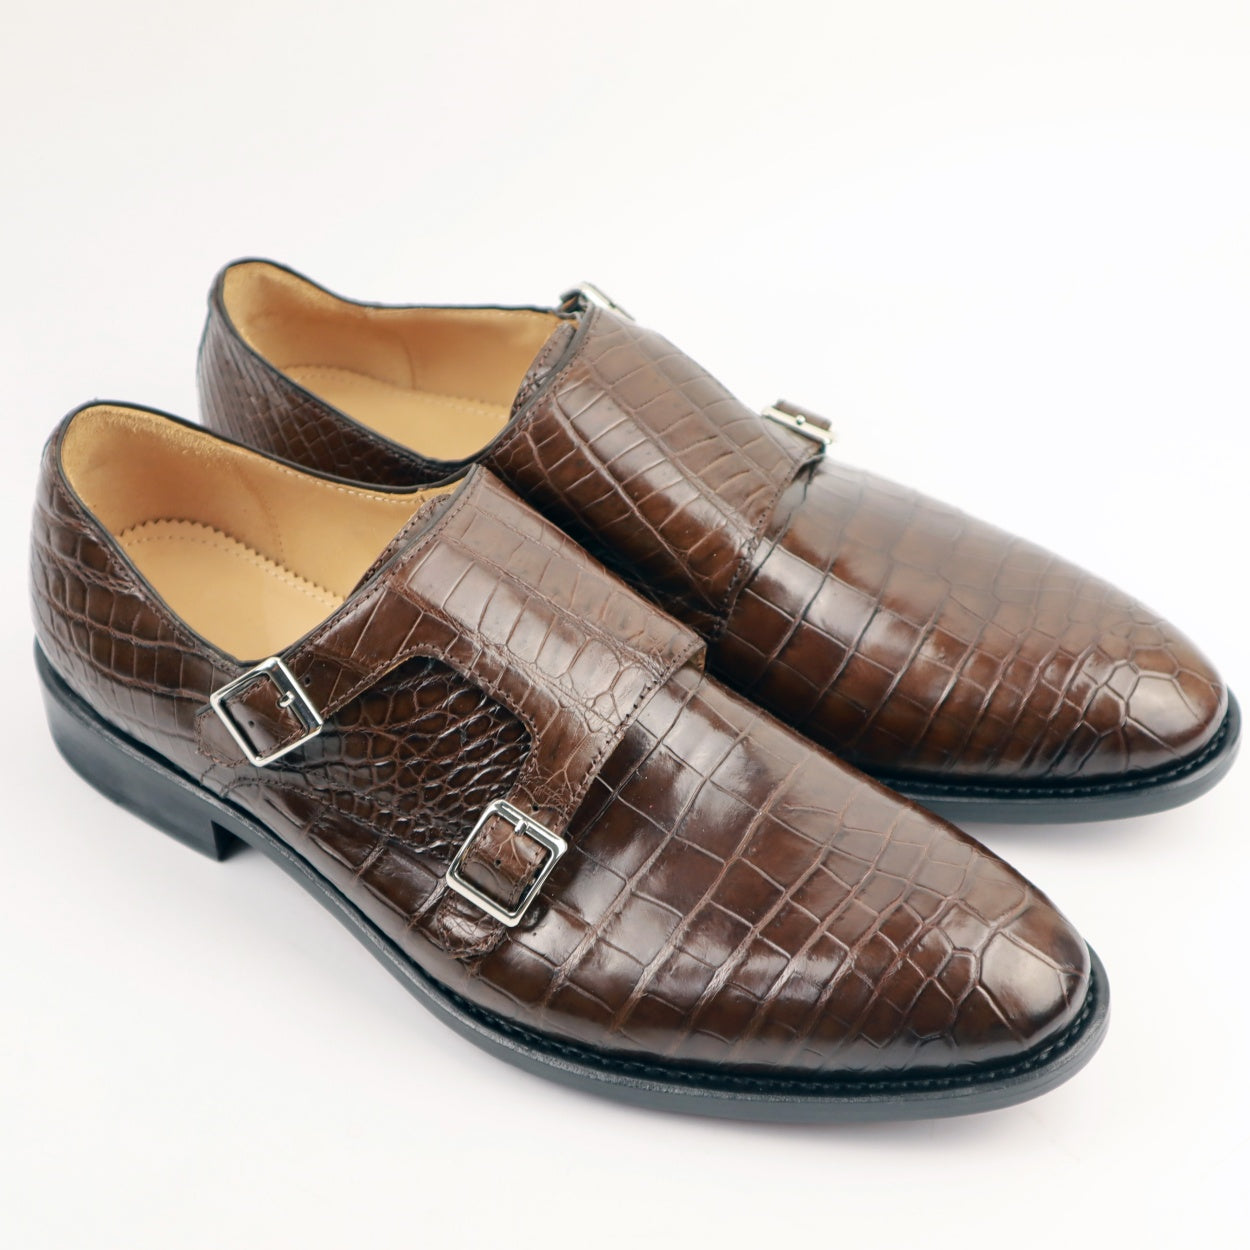 Crocodile Alligator Leather Double Monk Strap Dress Shoes Oxford Formal Business Shoes-Brown